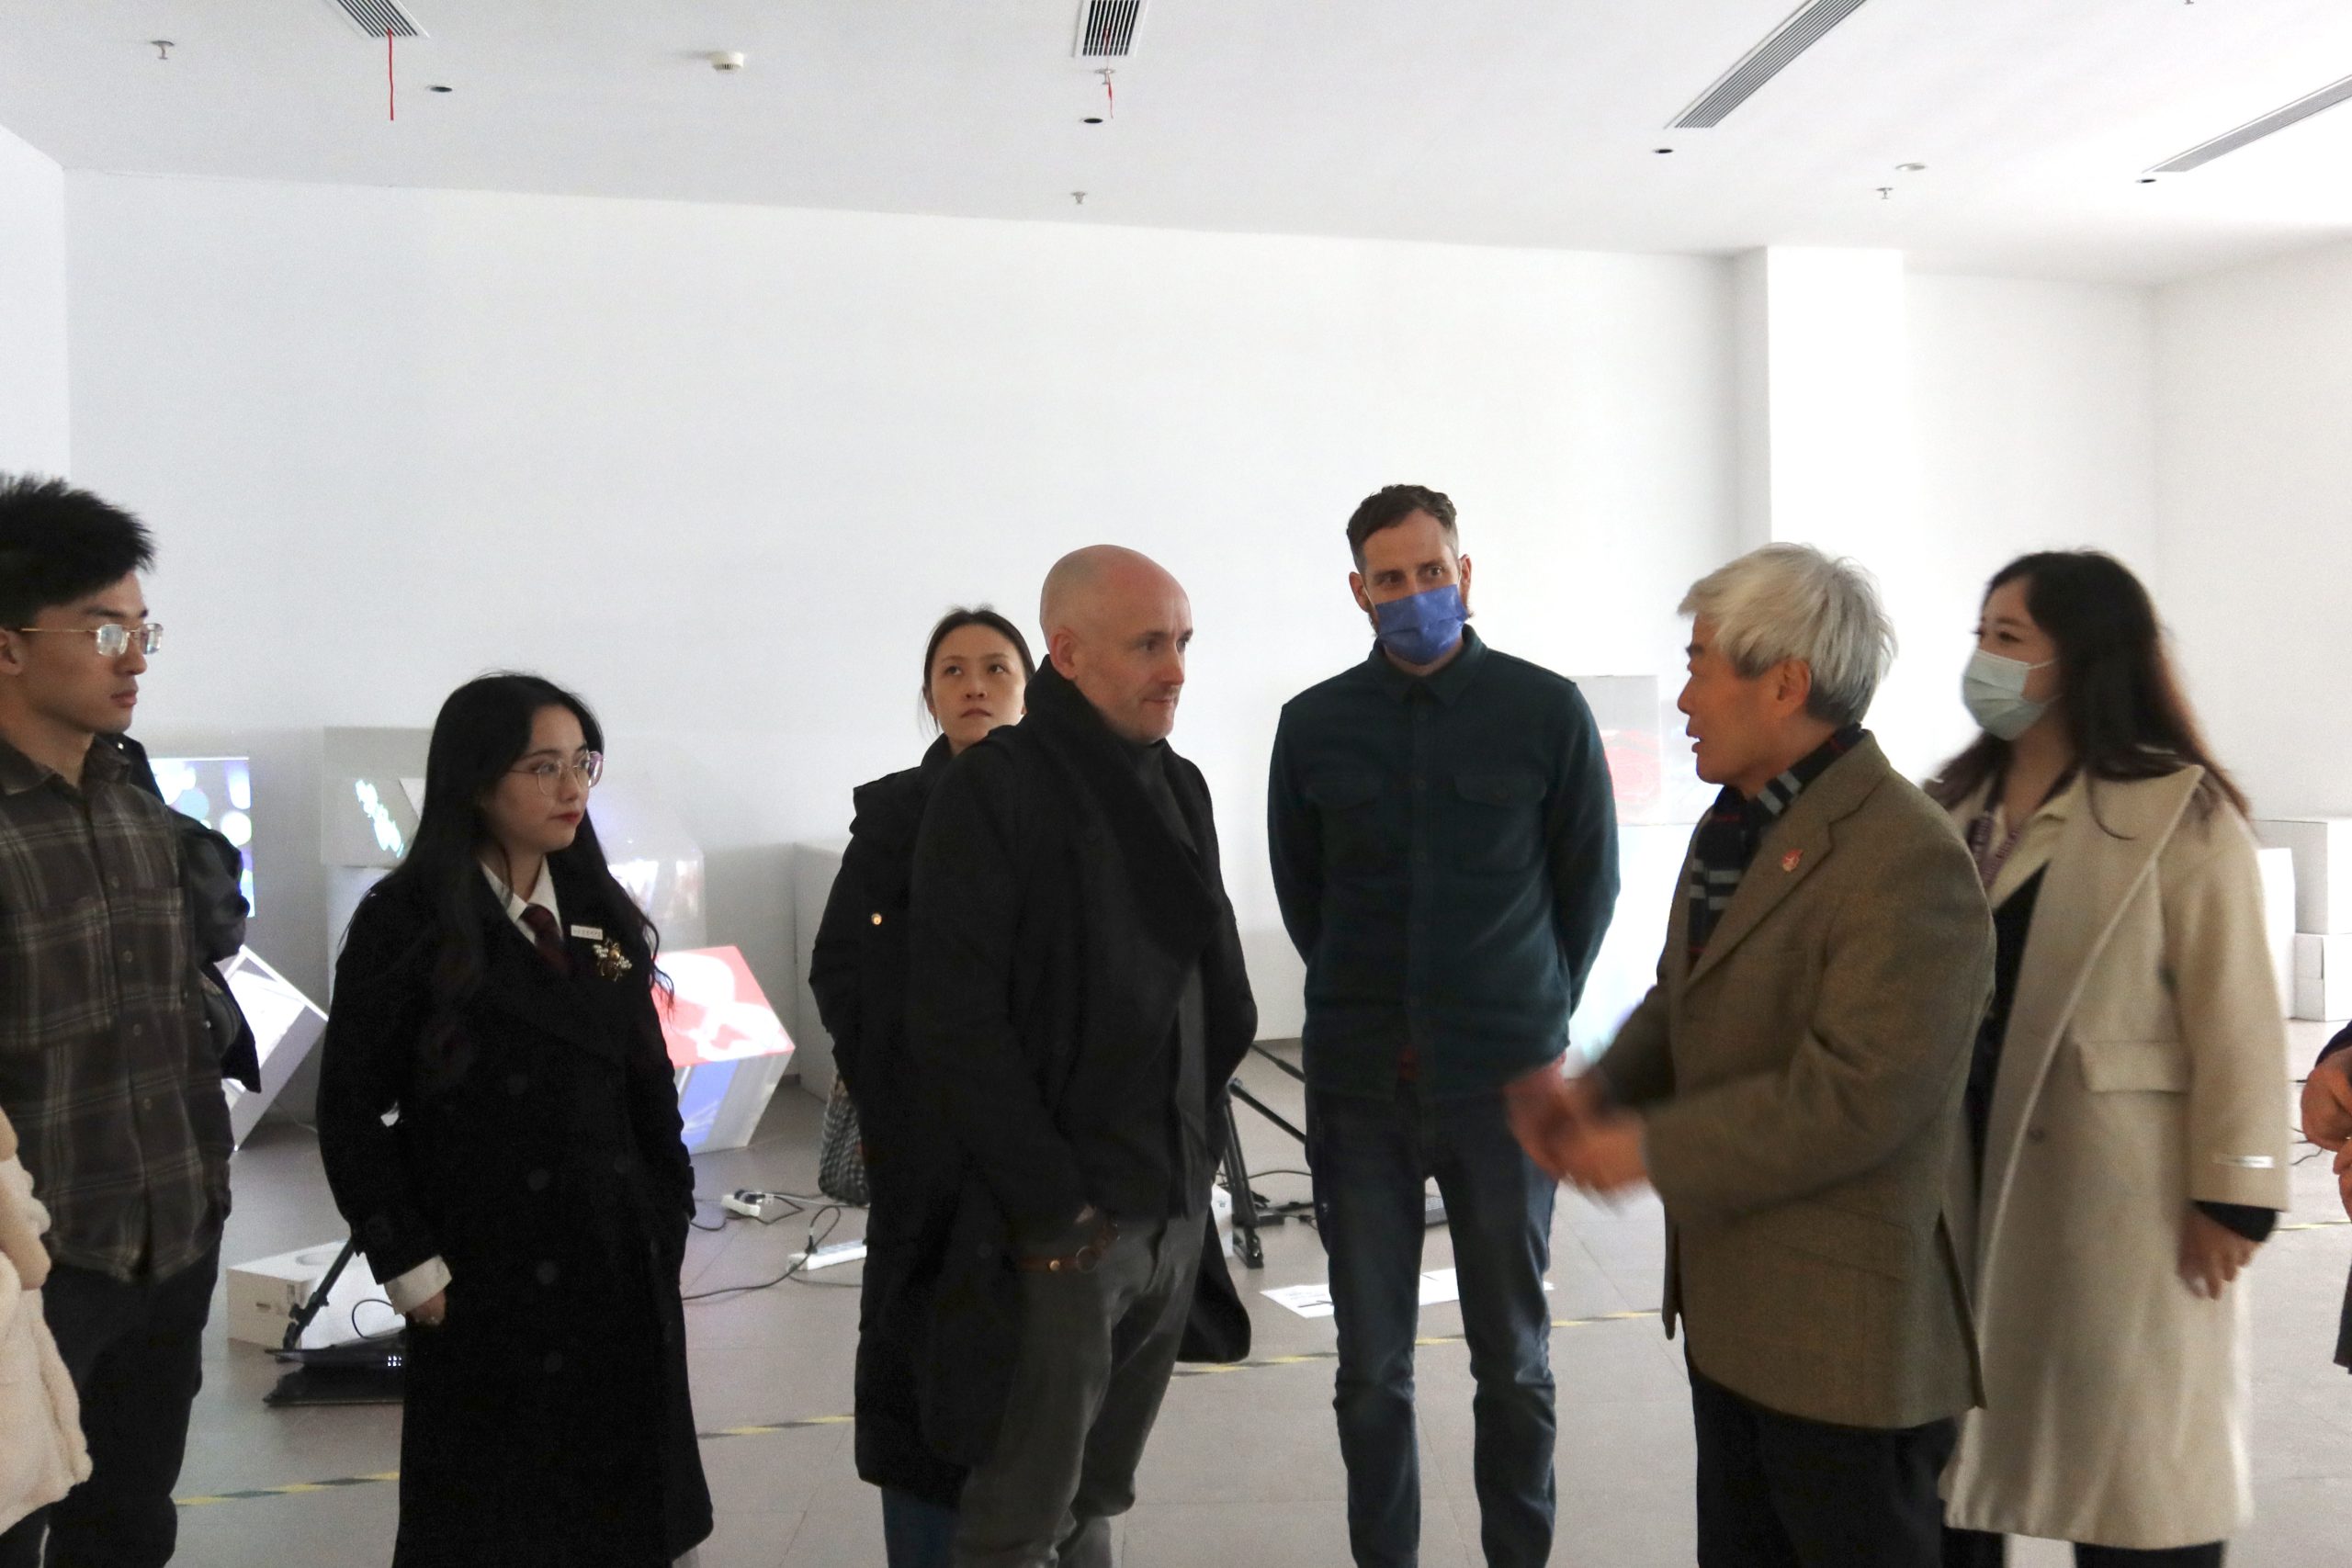 【Event Review】Nibble: A bite-sized Exhibition of Transdisciplinary Arts